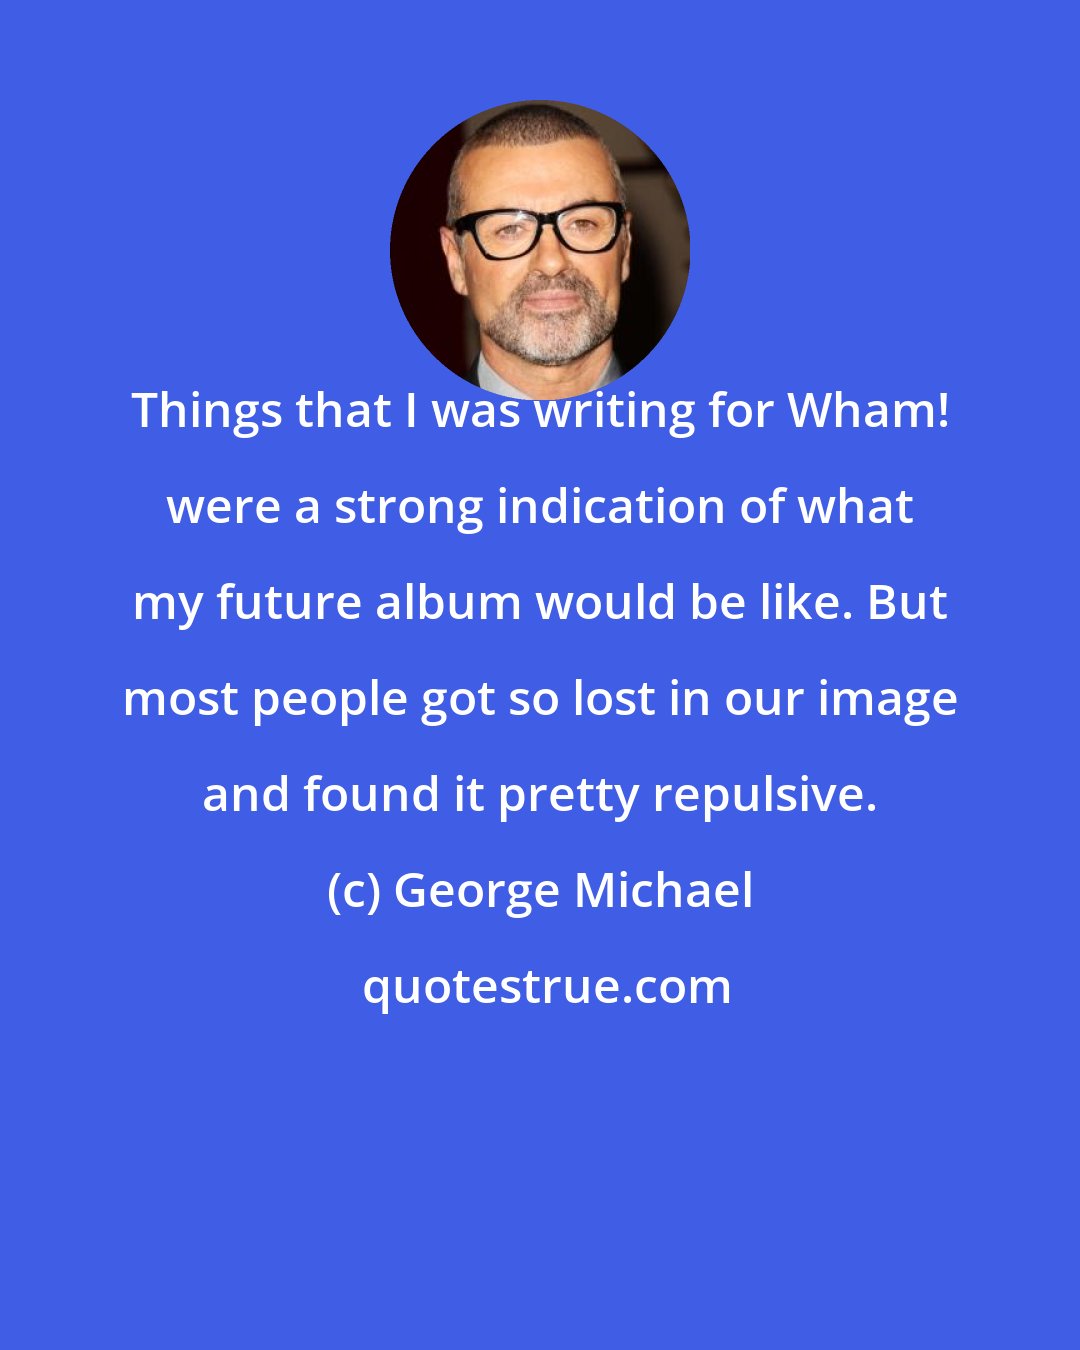 George Michael: Things that I was writing for Wham! were a strong indication of what my future album would be like. But most people got so lost in our image and found it pretty repulsive.